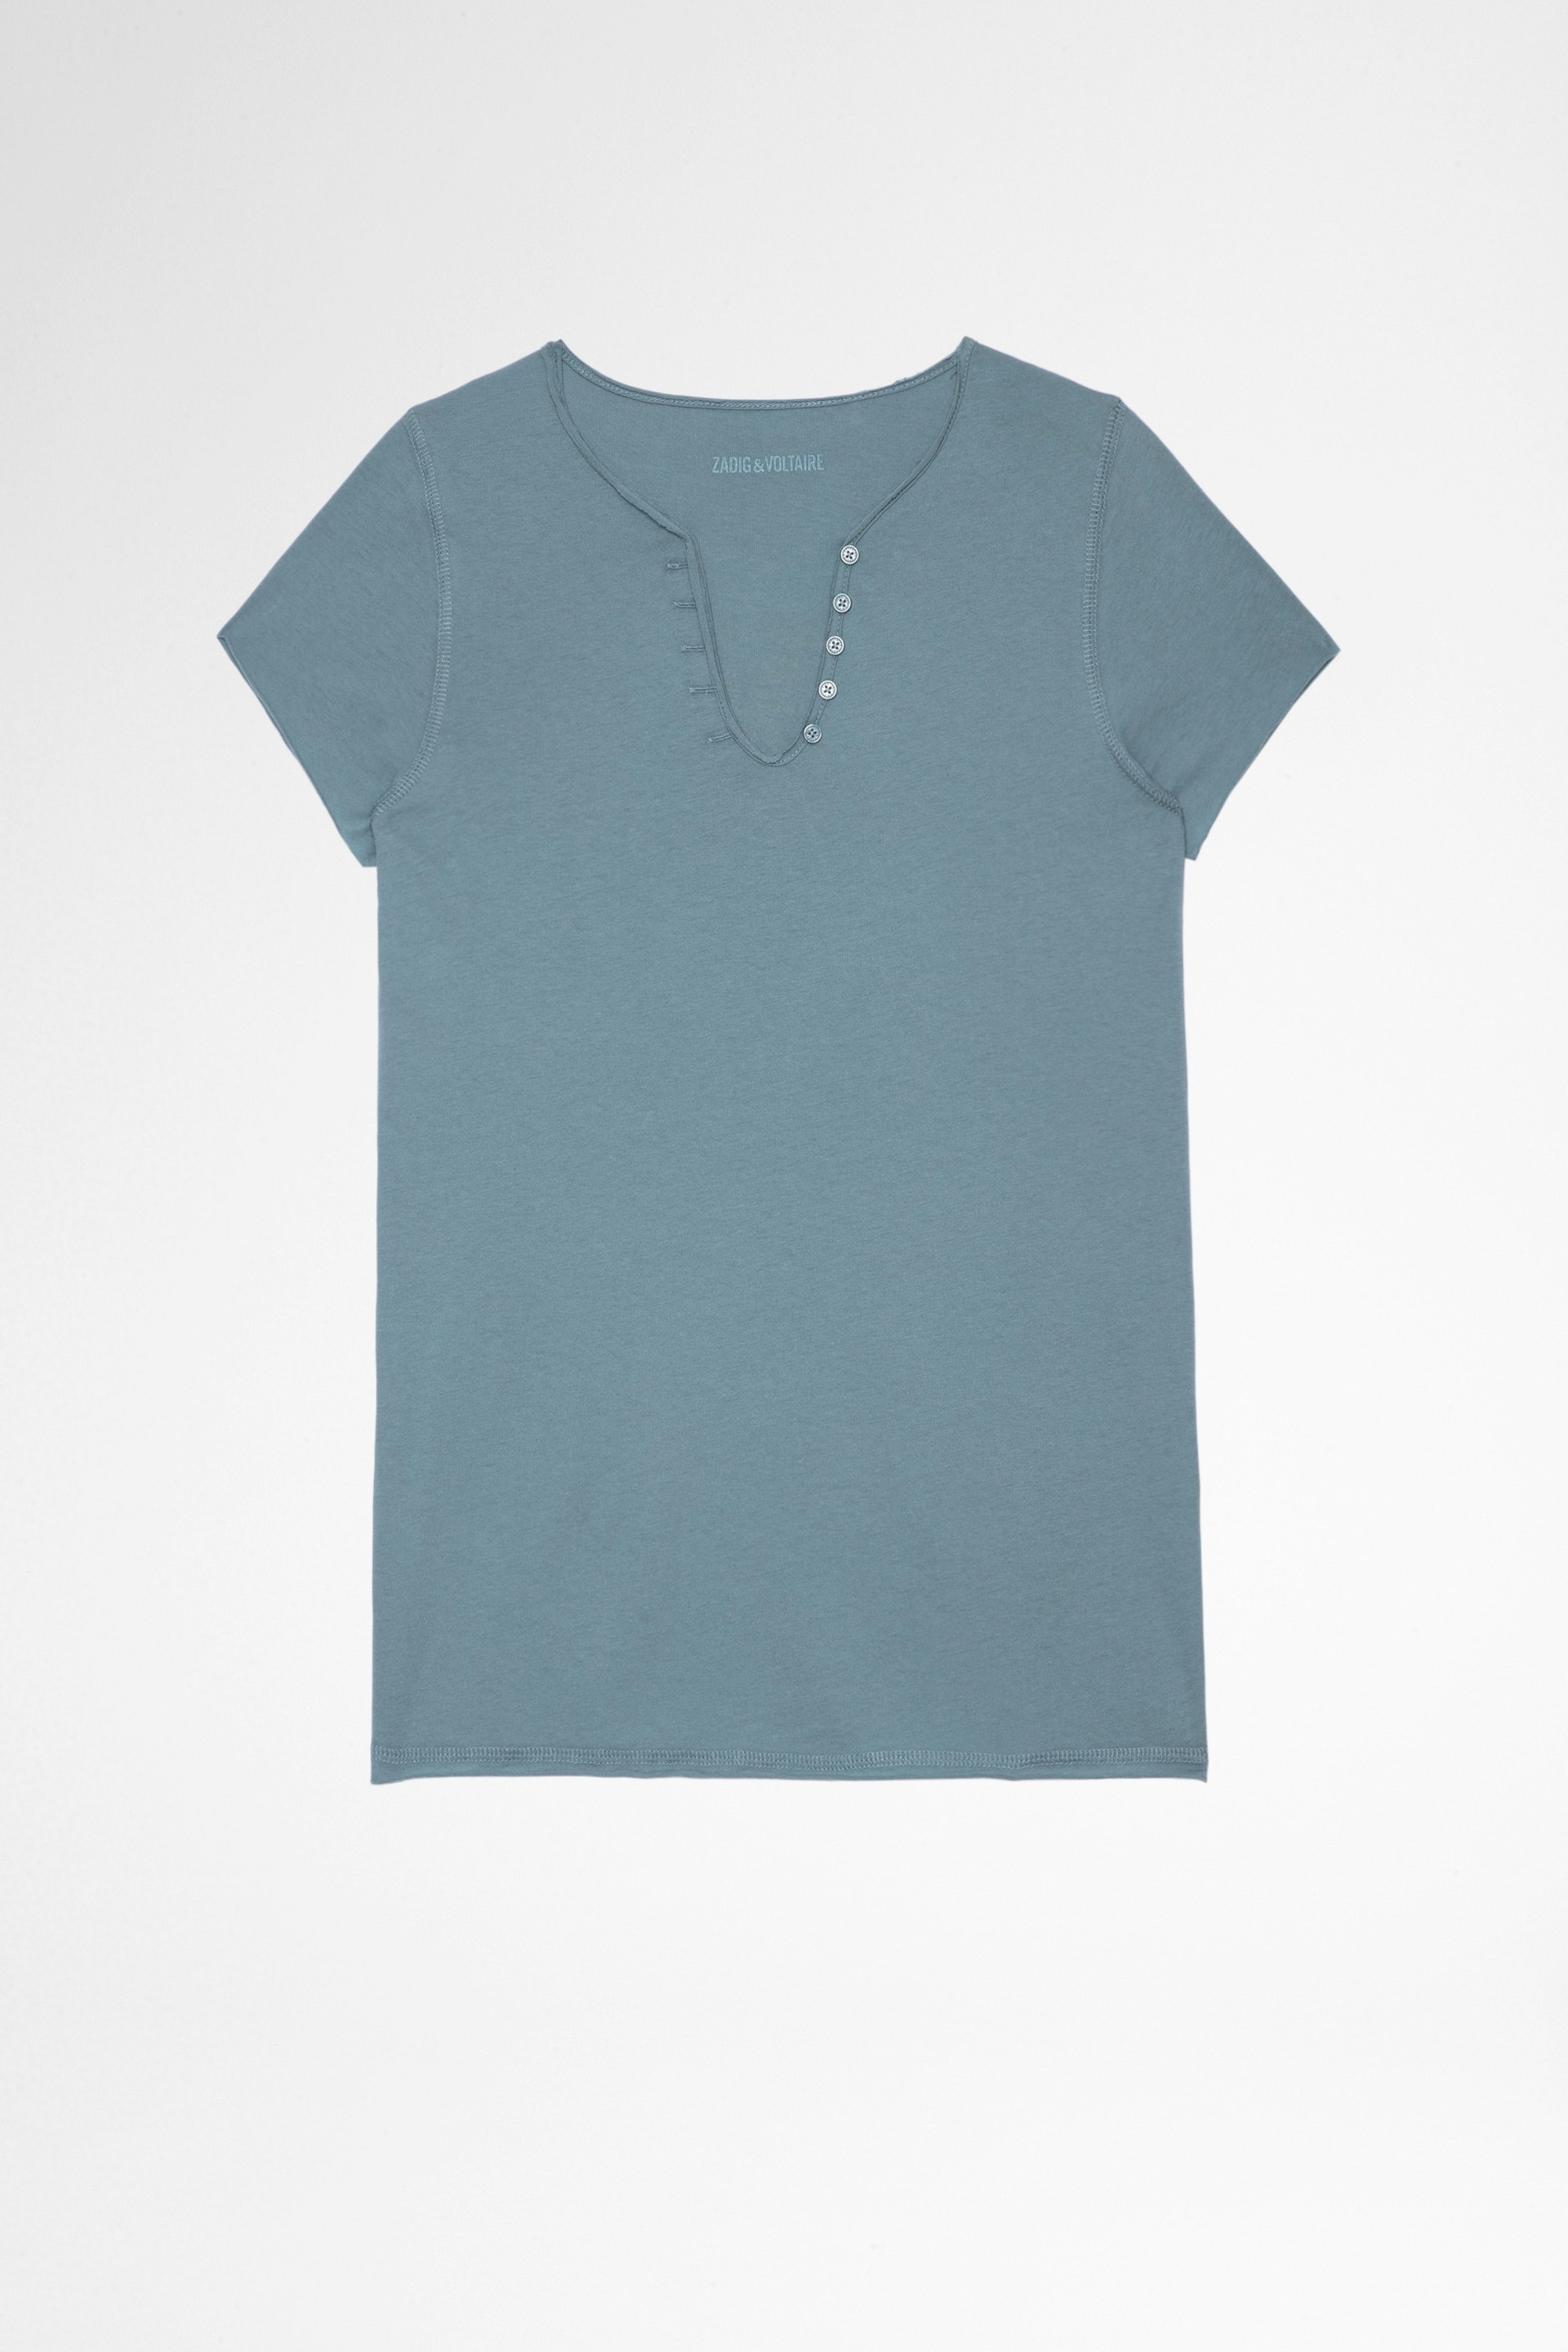 ZV New Blason Henley T-shirt Women's blue-grey cotton Henley T-shirt with ZV applique on the back